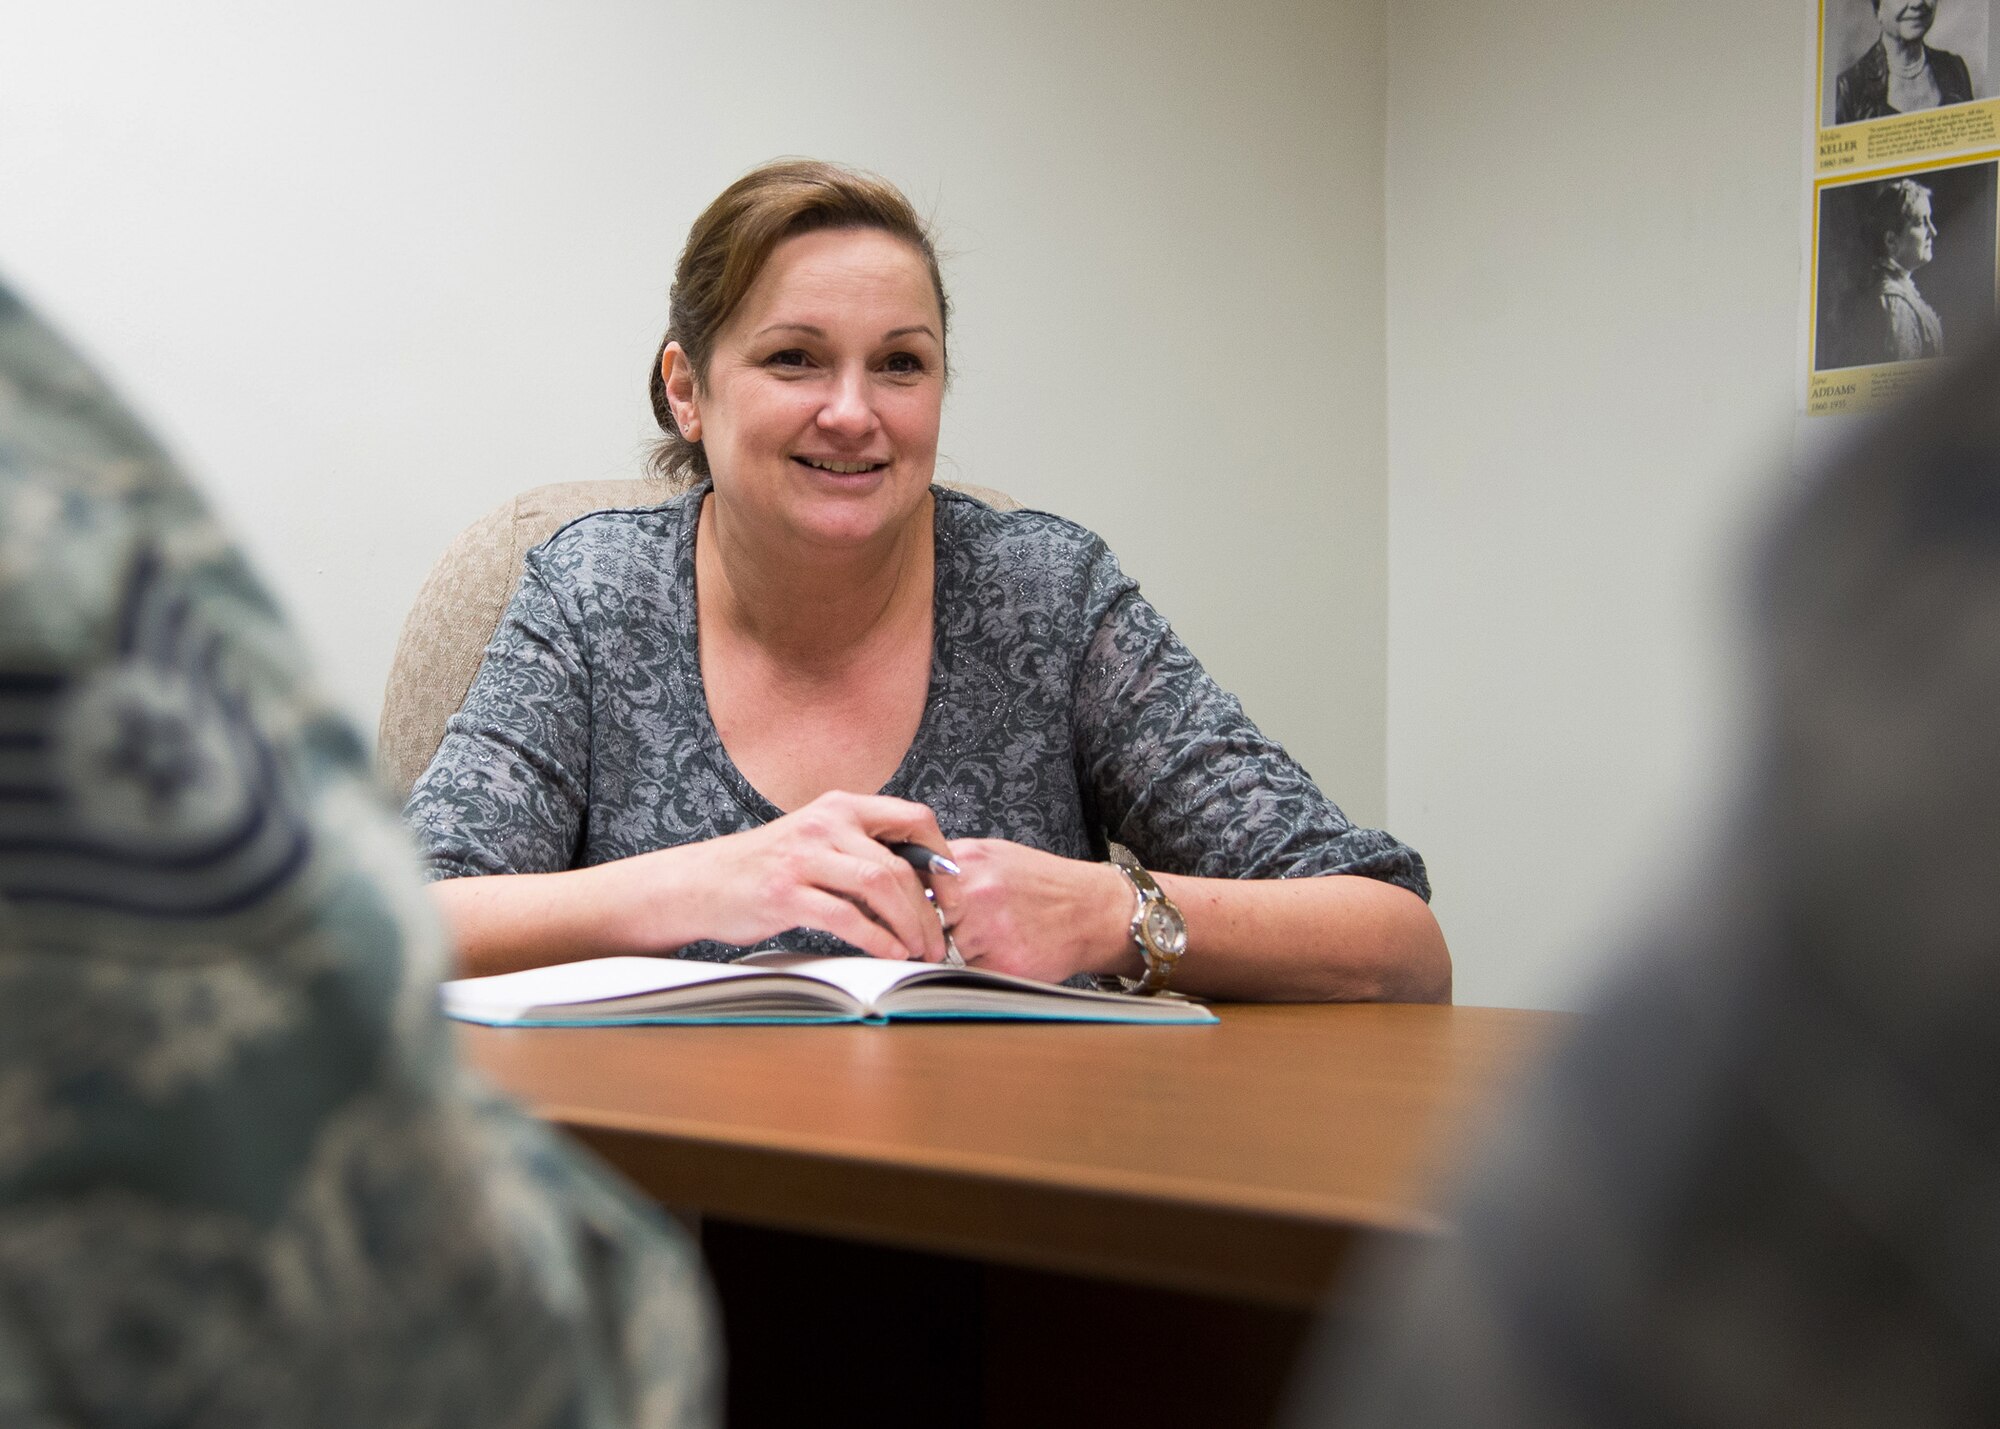 Wendy Reyes, the 66th Air Base Group Equal Opportunity director, meets with members of the EO office in Building 1217 Dec. 8. Reyes has worked in numerous positions within the EO community throughout her 20 year career. (U.S. Air Force photo by Mark Herlihy)